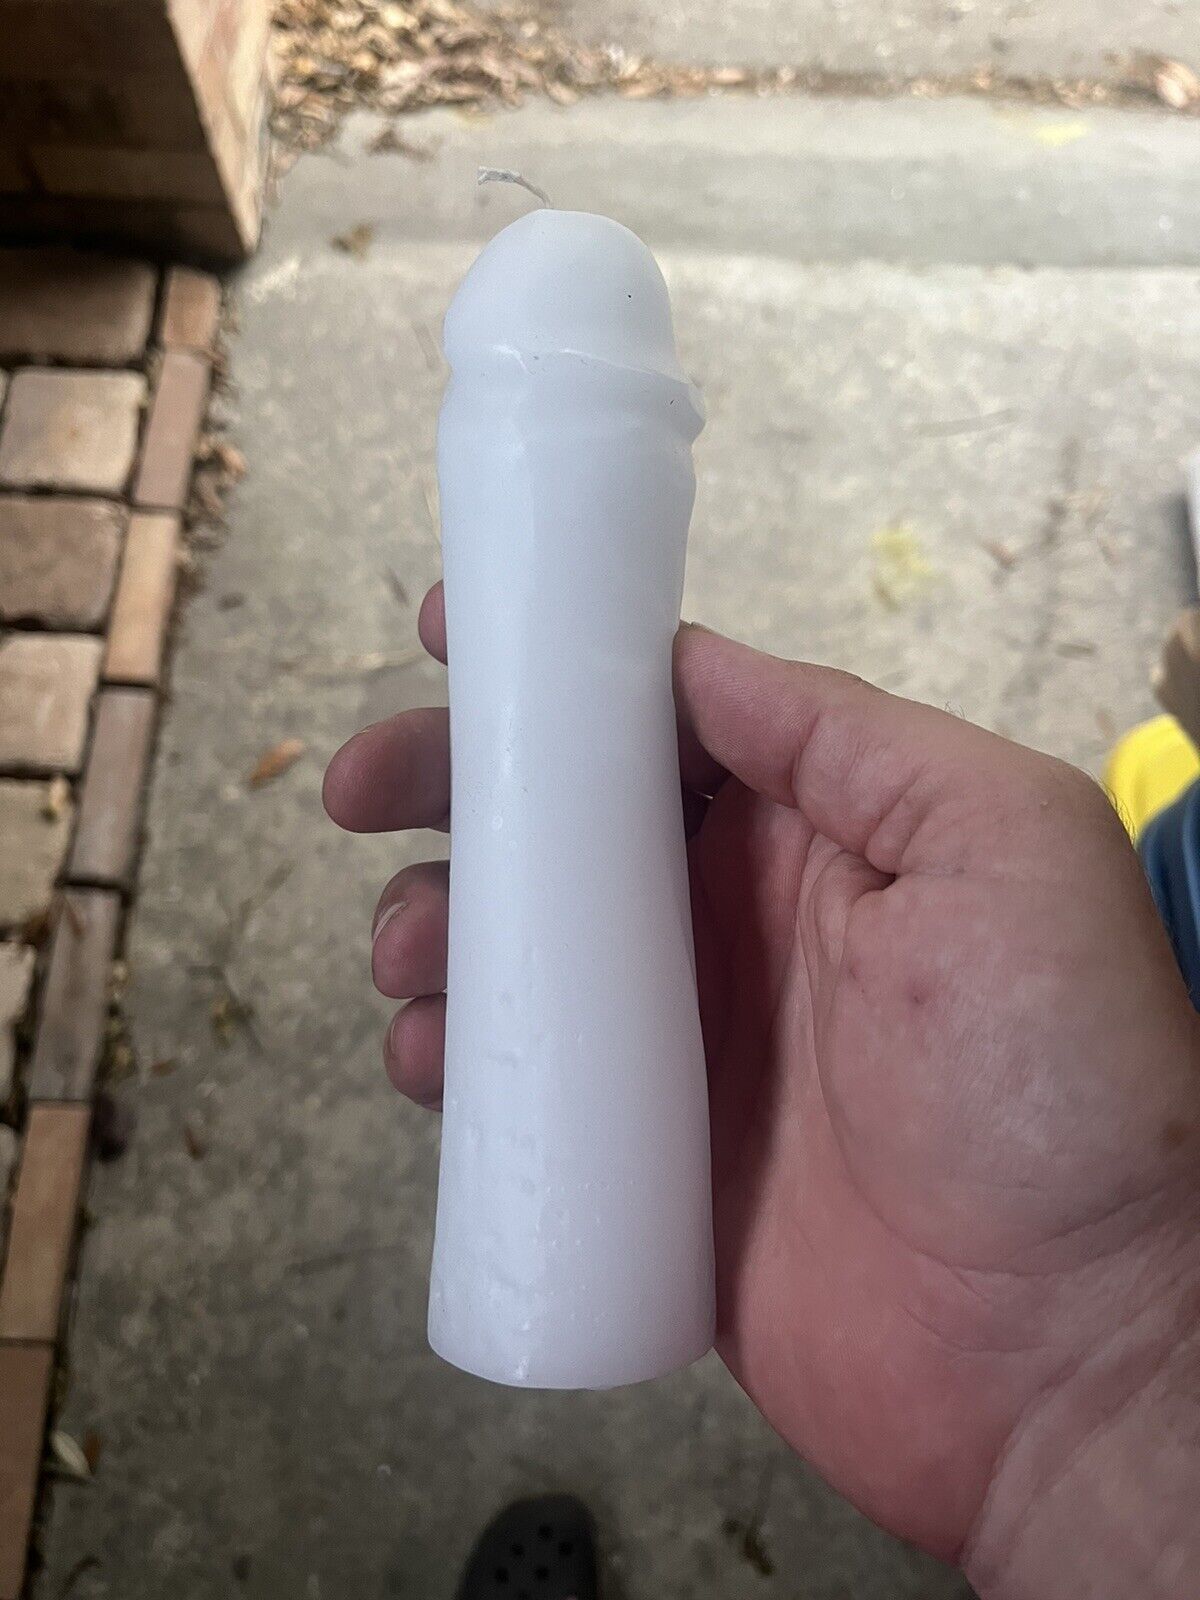 White Male Gender Penis candle 6 1/2